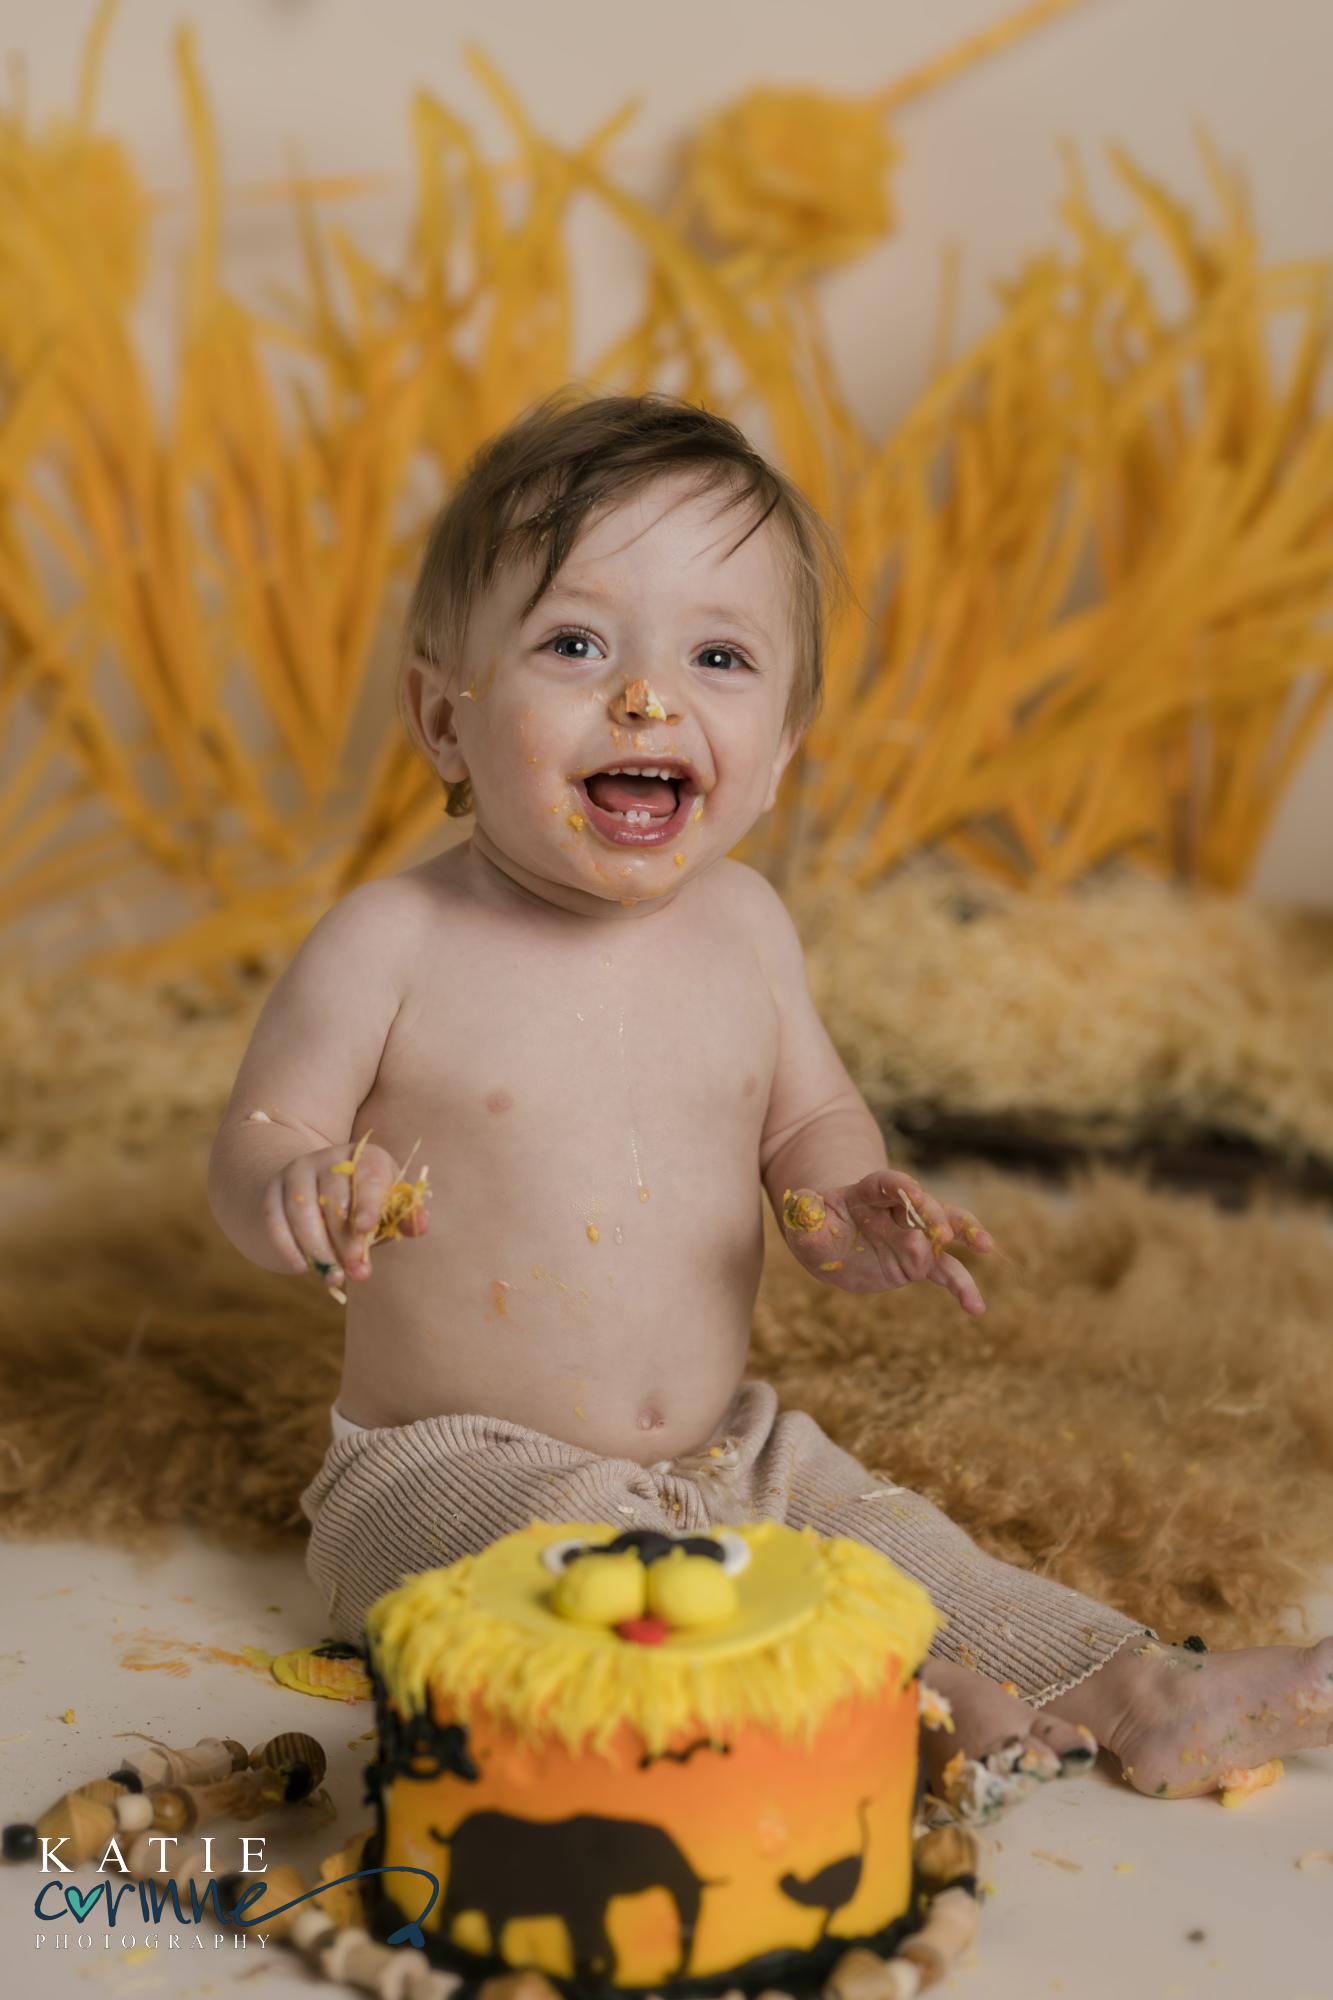 one year old baby poses with his birthday smash cake